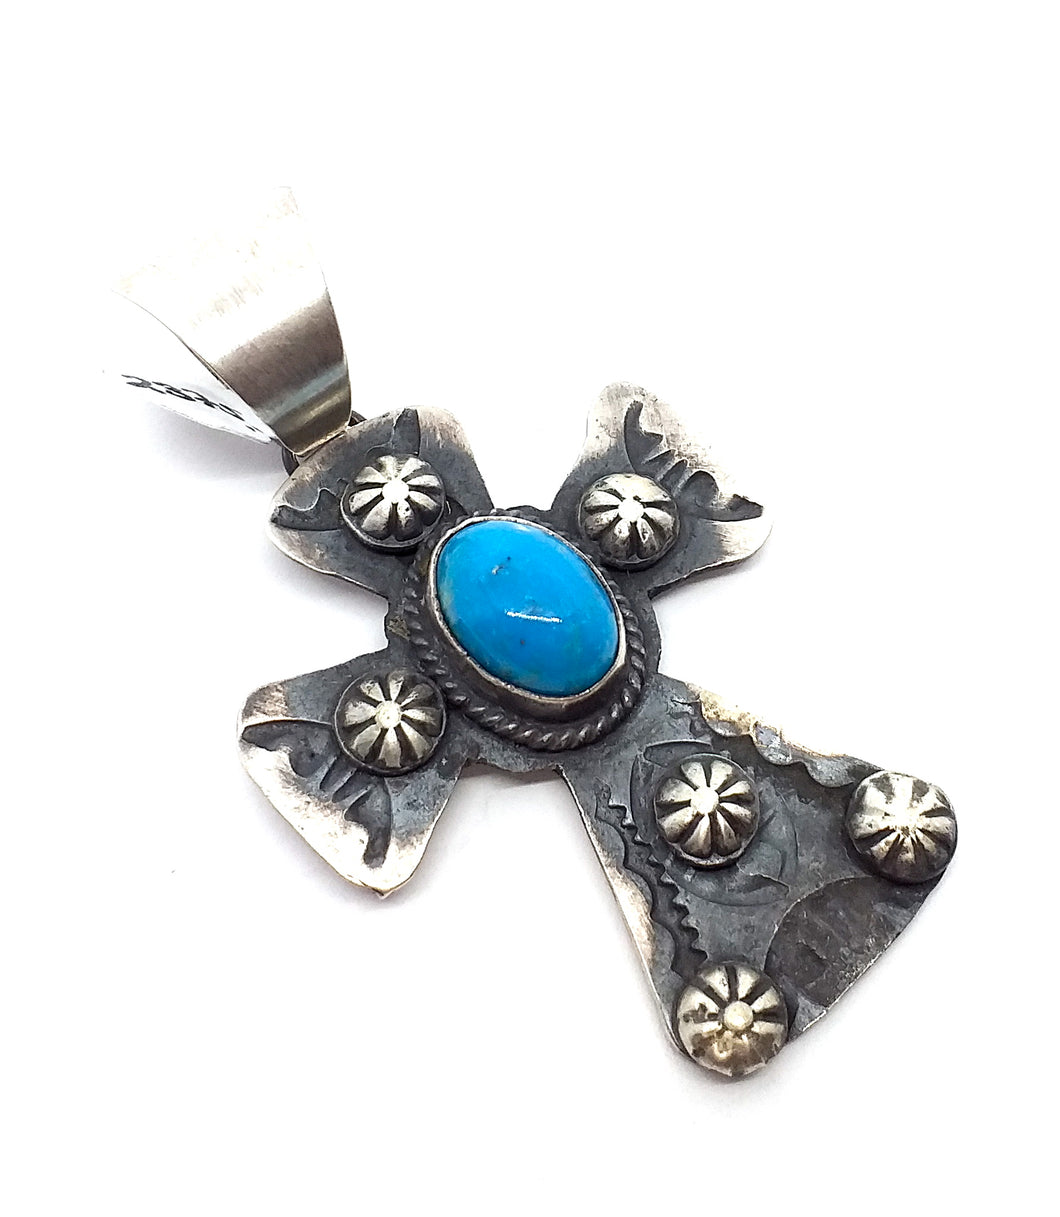 Navajo Pendant turquoise 37x35 mm in oxidized sterling silver (925)